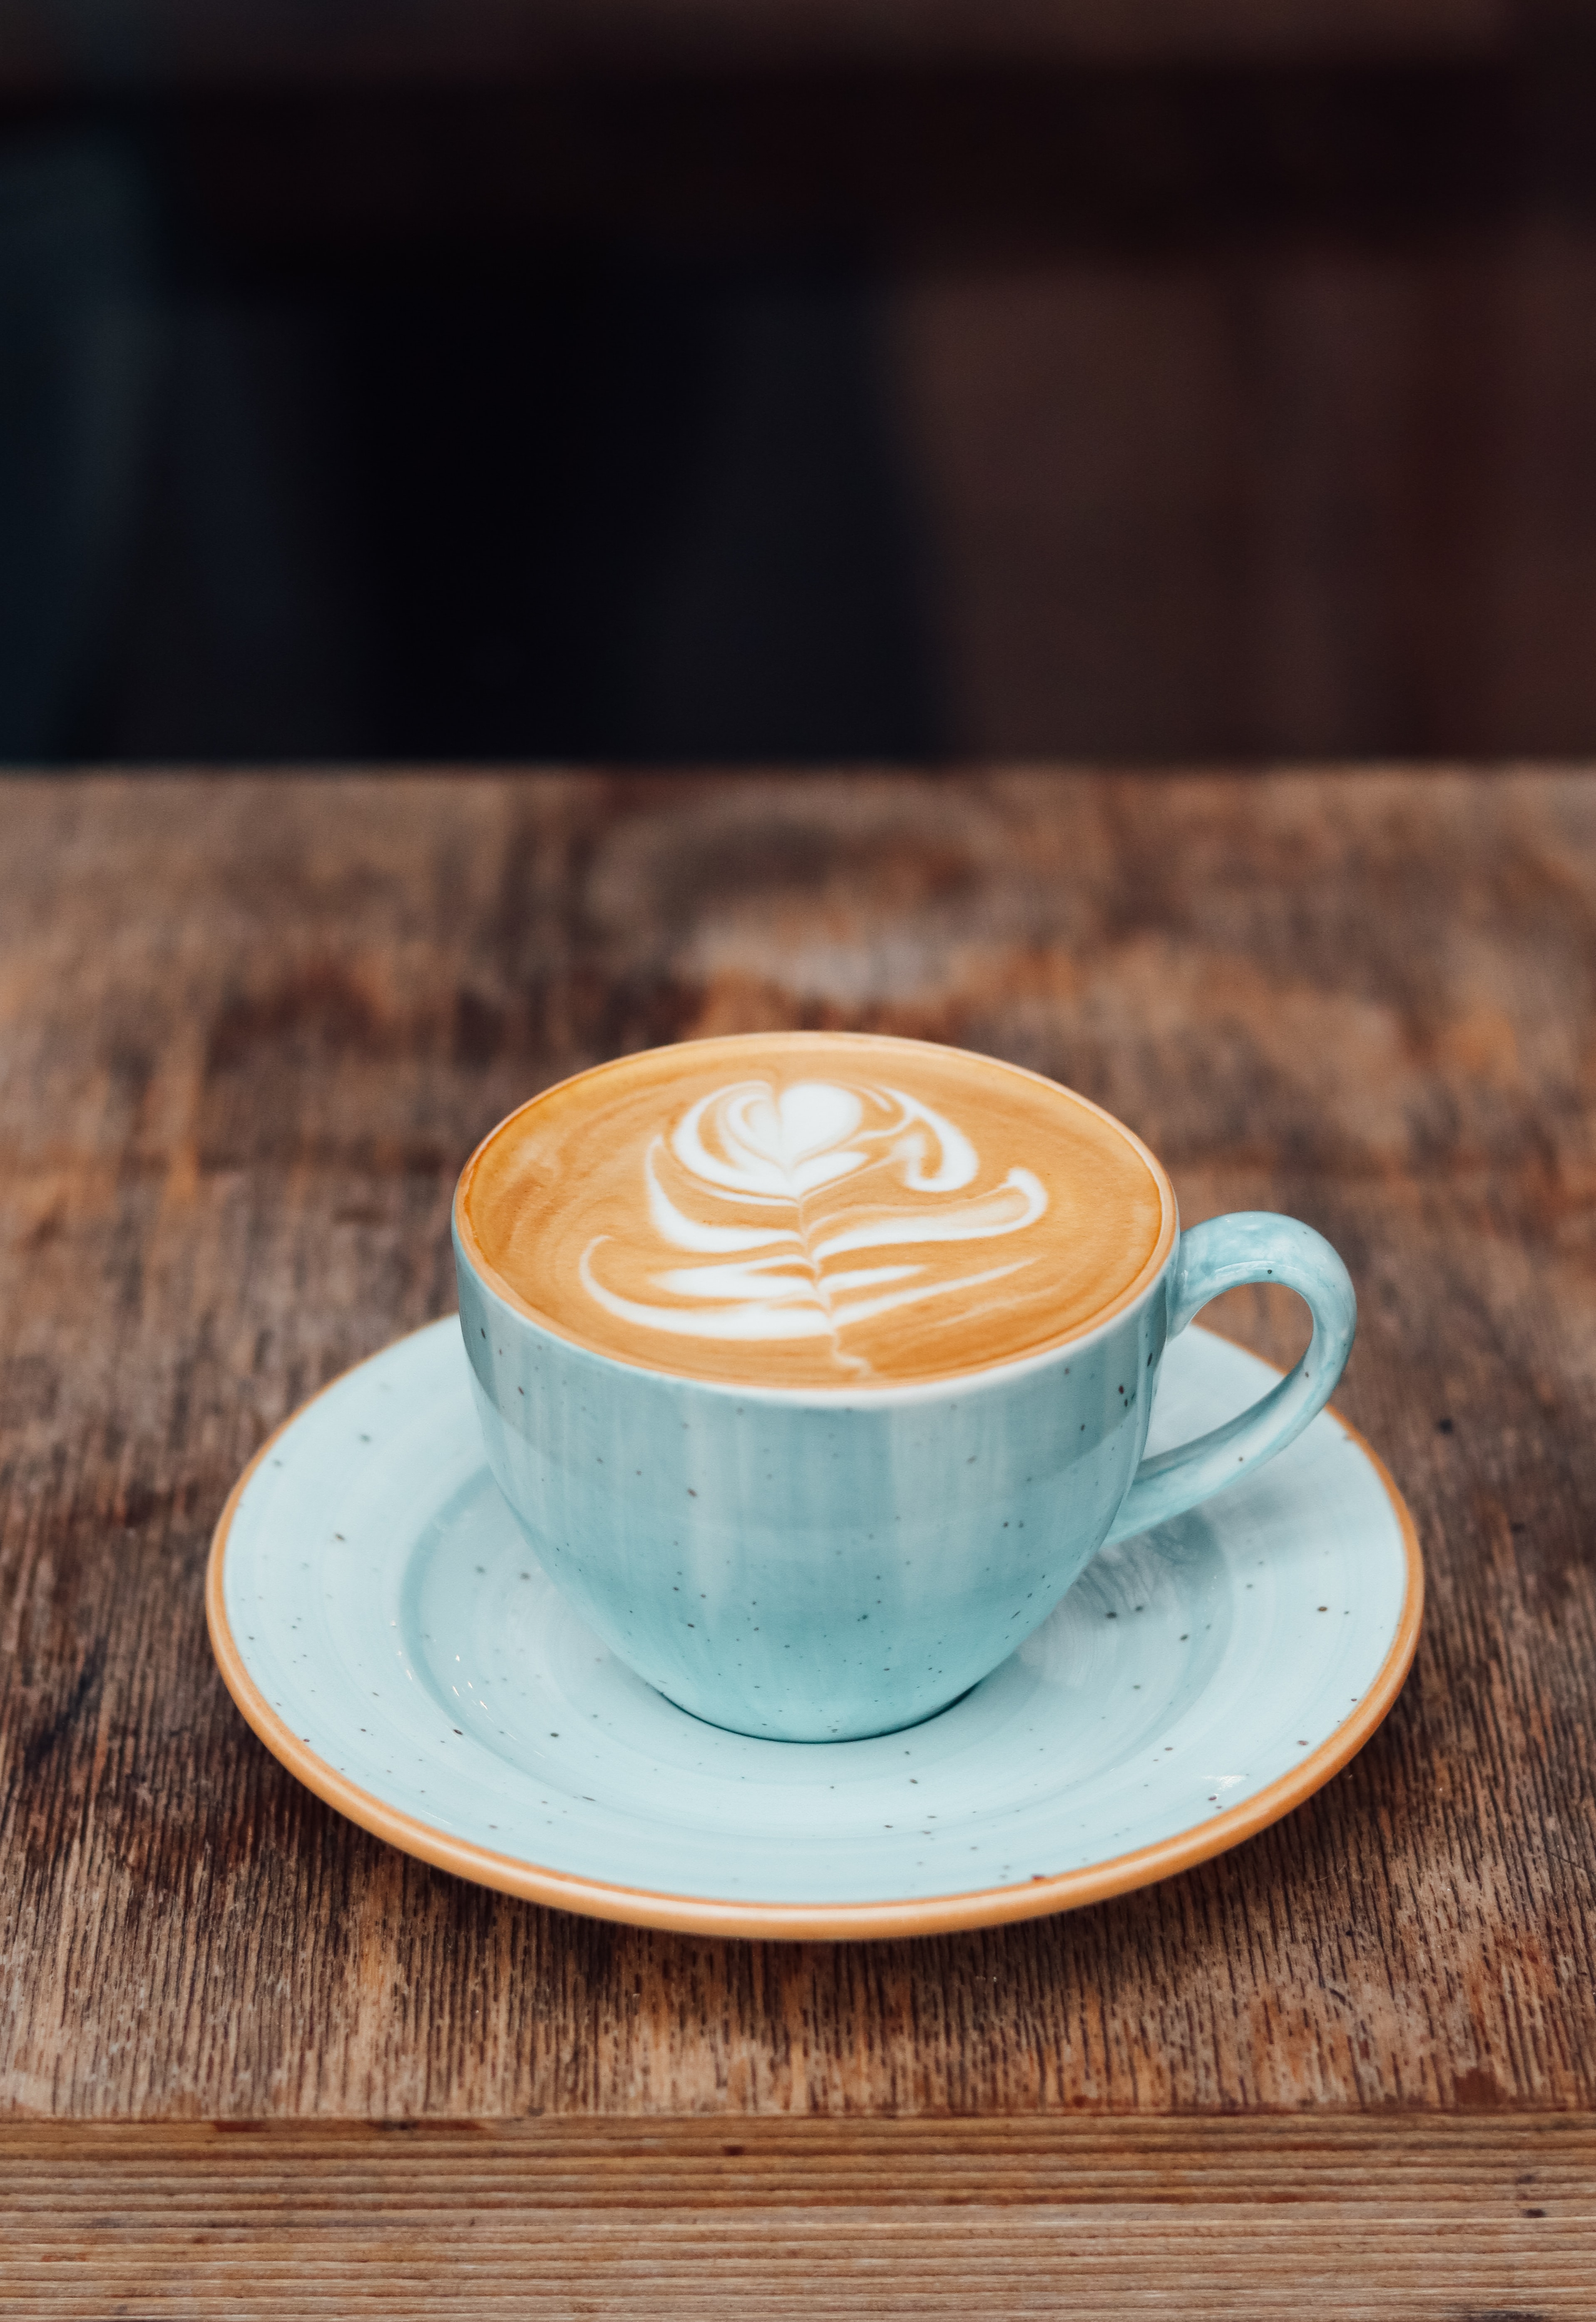 113910 Screensavers and Wallpapers Cappuccino for phone. Download food, coffee, cup, cappuccino, drink, beverage pictures for free